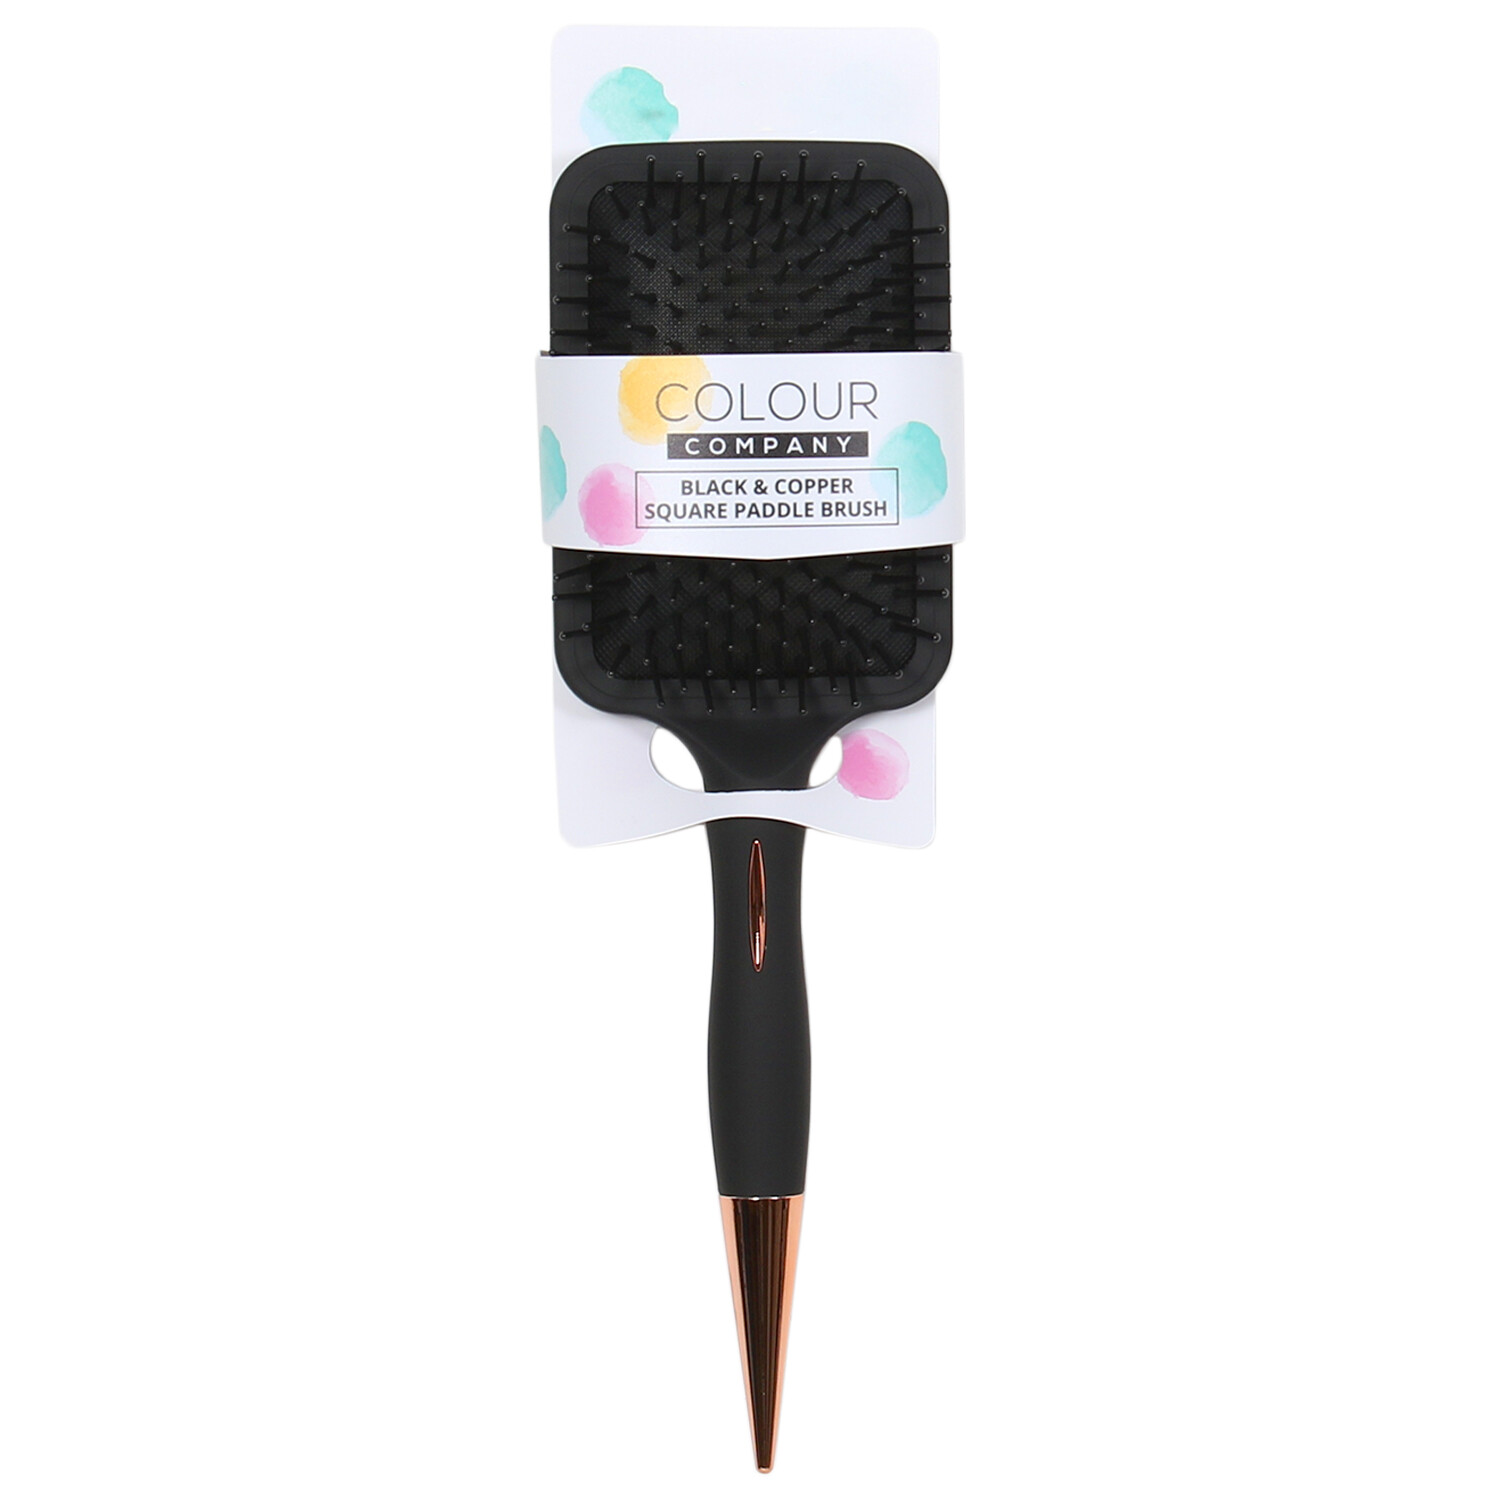 Black and Copper Square Paddle Brush Image